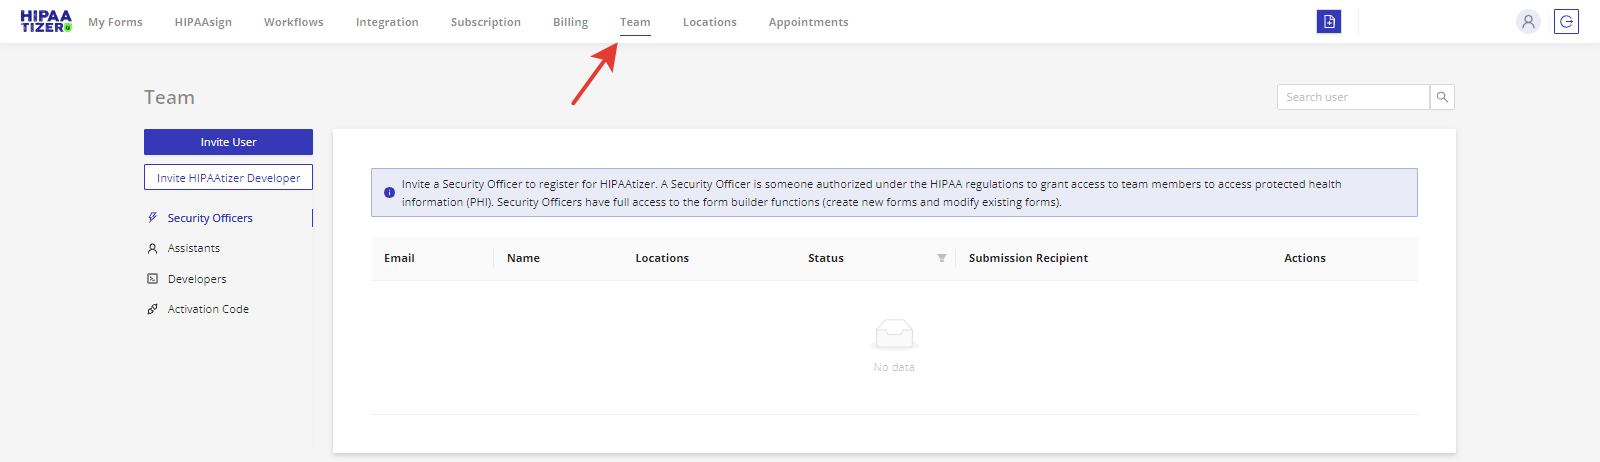 Image of the "Team" page, where users can invite and manage team members to collaborate on the forms.